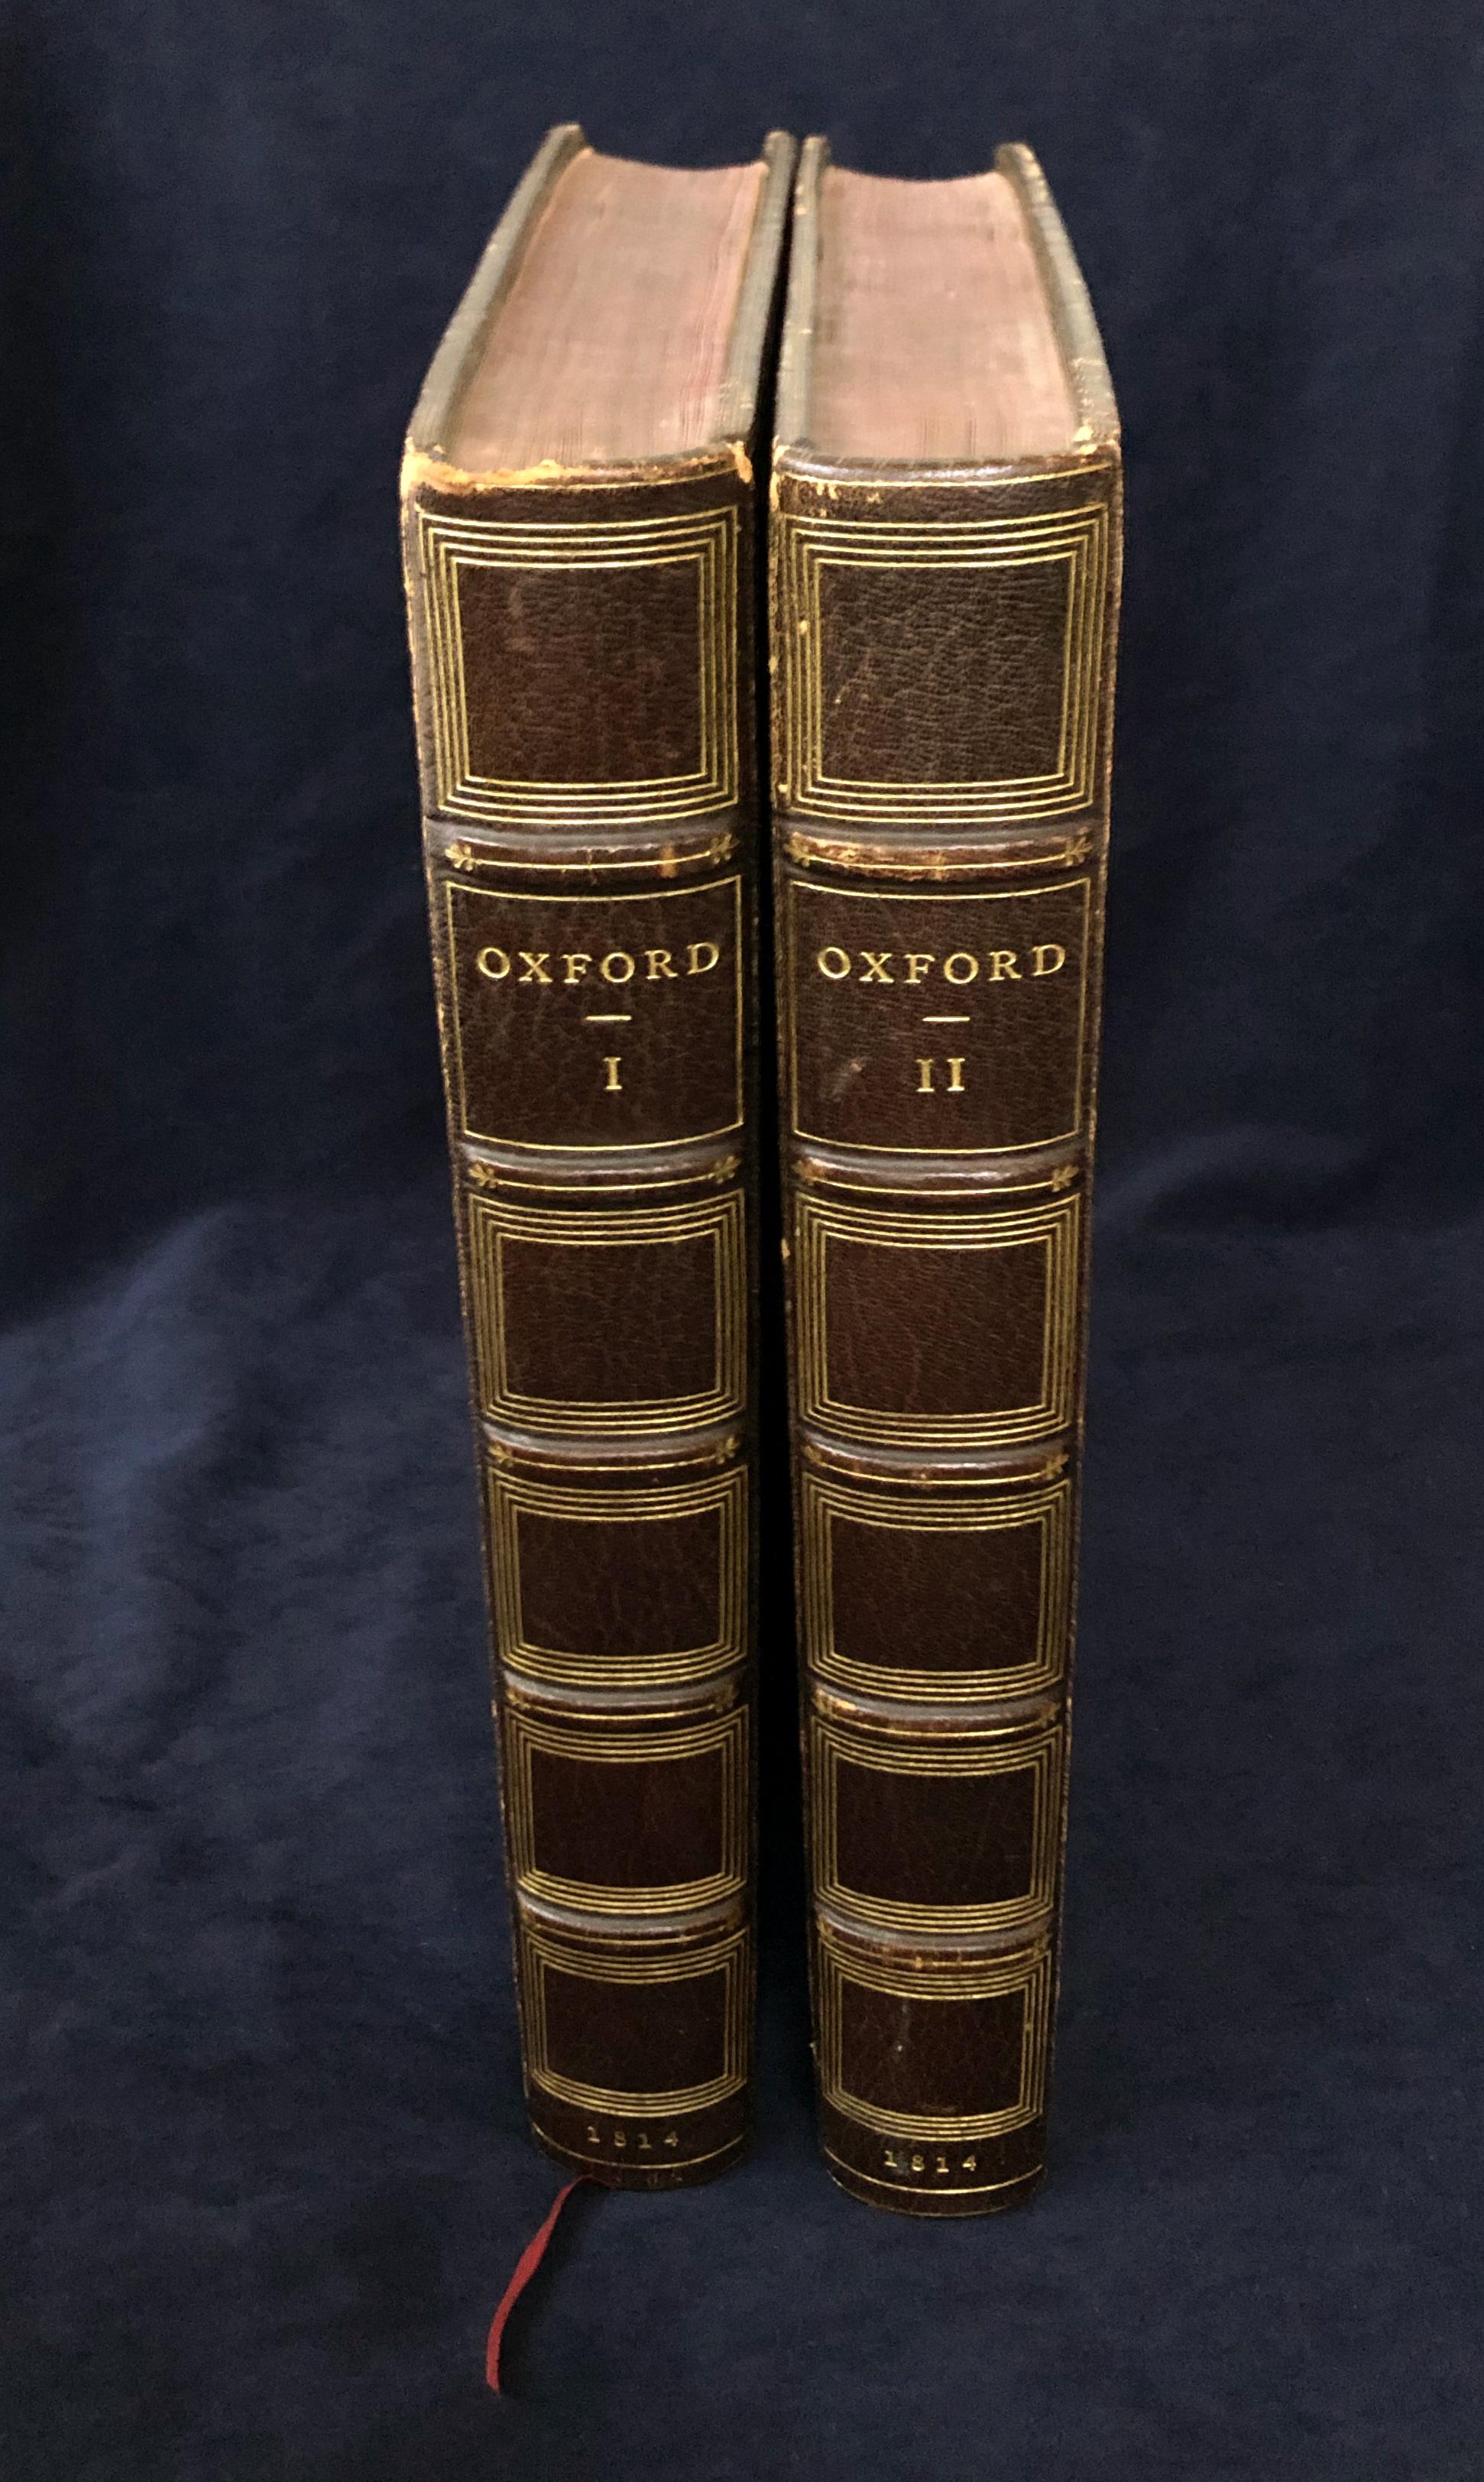 First Edition. In two Quarto volumes, with copious color illustrations. 

London: R. Ackermann, printed by L. Harrison & J. C. Leigh, 1814. 
13 x 10.63 in. (330 x 270 mm). vol. 1: xxvi, 275, vi; vol. 2: iv, 262, vi. Half-titles, list of subscribers,